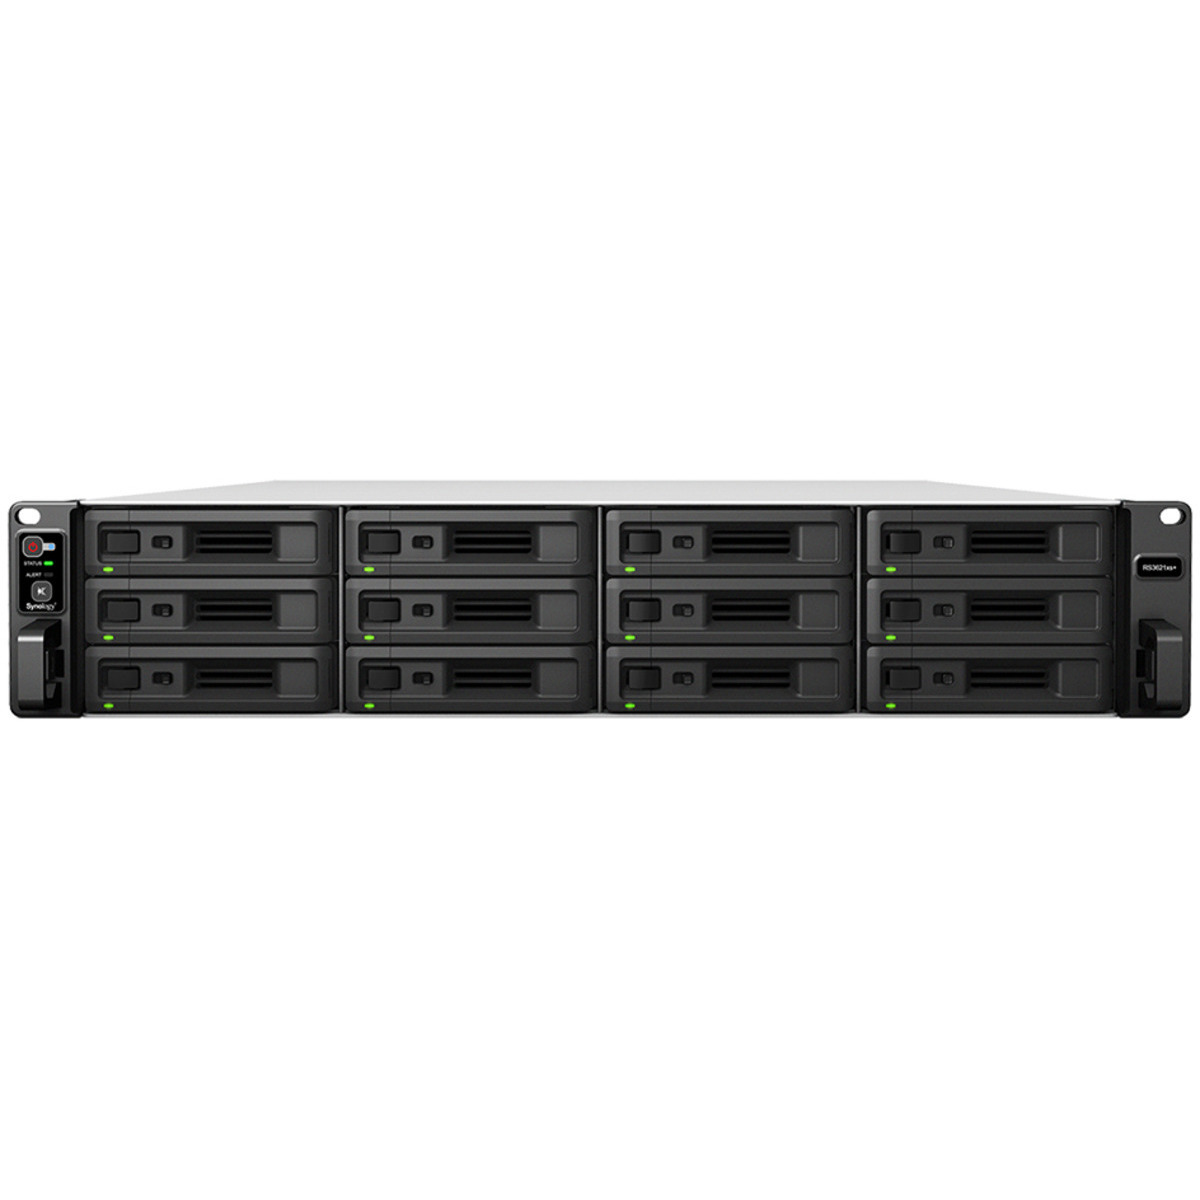 Synology RackStation RS3621xs+ 48tb 12-Bay RackMount Large Business / Enterprise NAS - Network Attached Storage Device 8x6tb Western Digital Red Pro WD6003FFBX 3.5 7200rpm SATA 6Gb/s HDD NAS Class Drives Installed - Burn-In Tested RackStation RS3621xs+